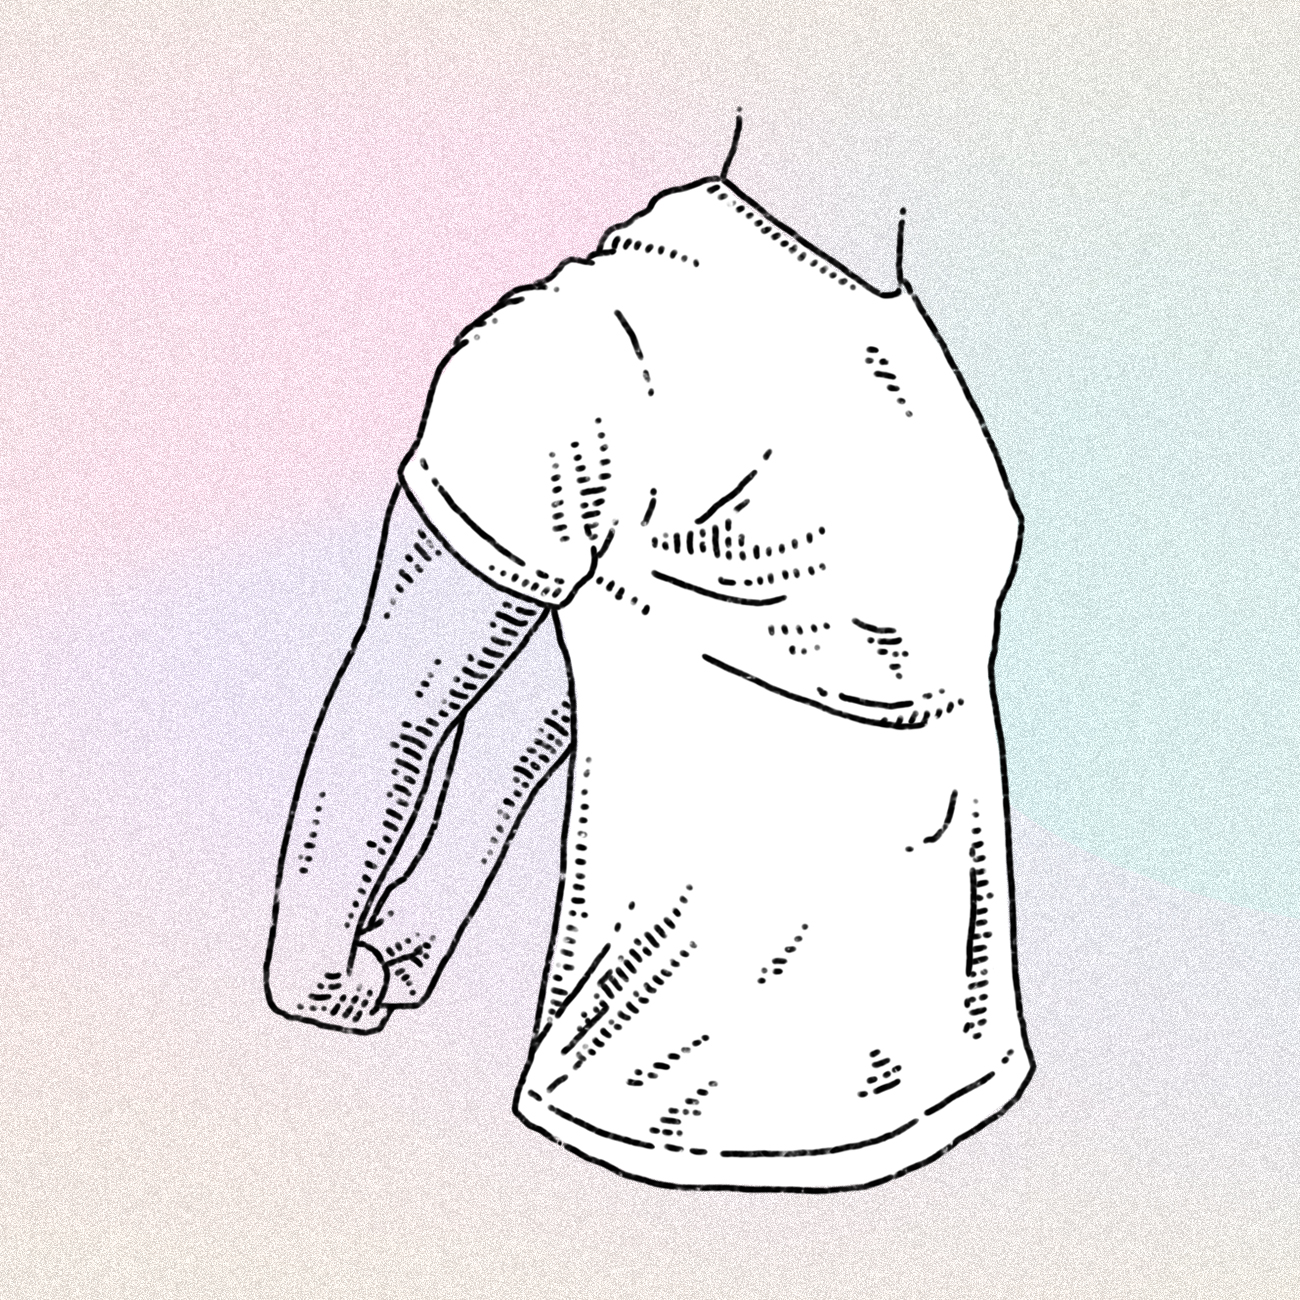 Person with chest binder underneath t-shirt